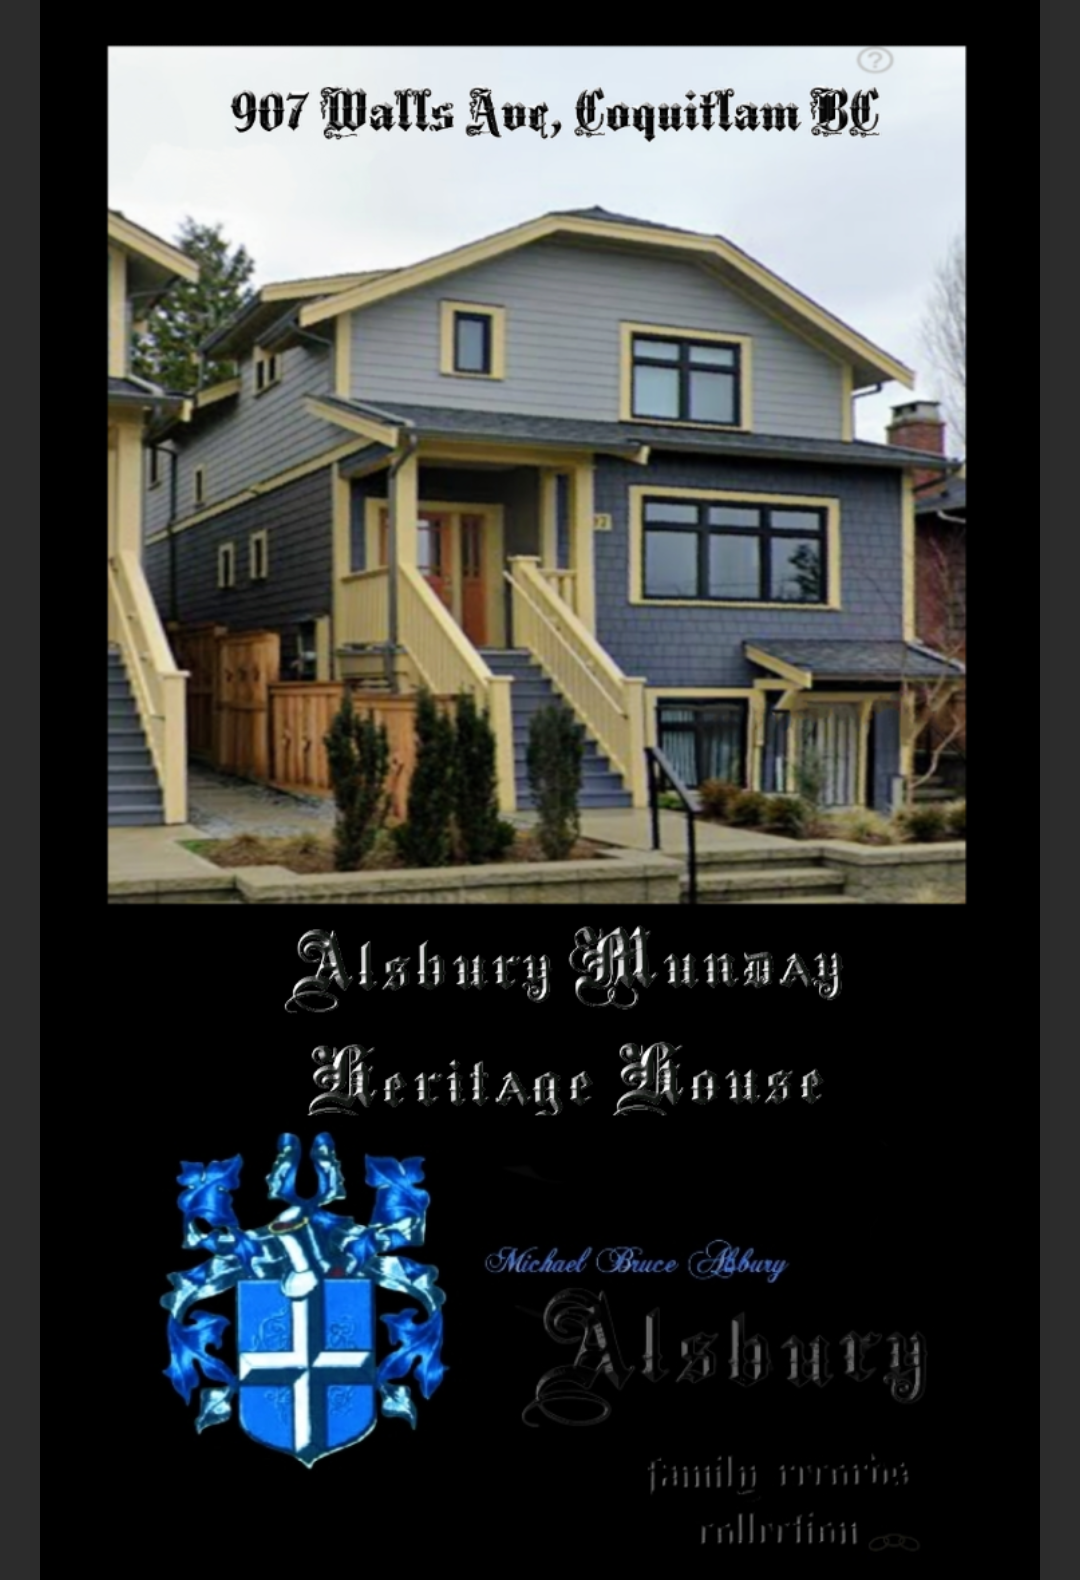 "Alsbury Munday Heritage House" Michael Asbury family record's collection 